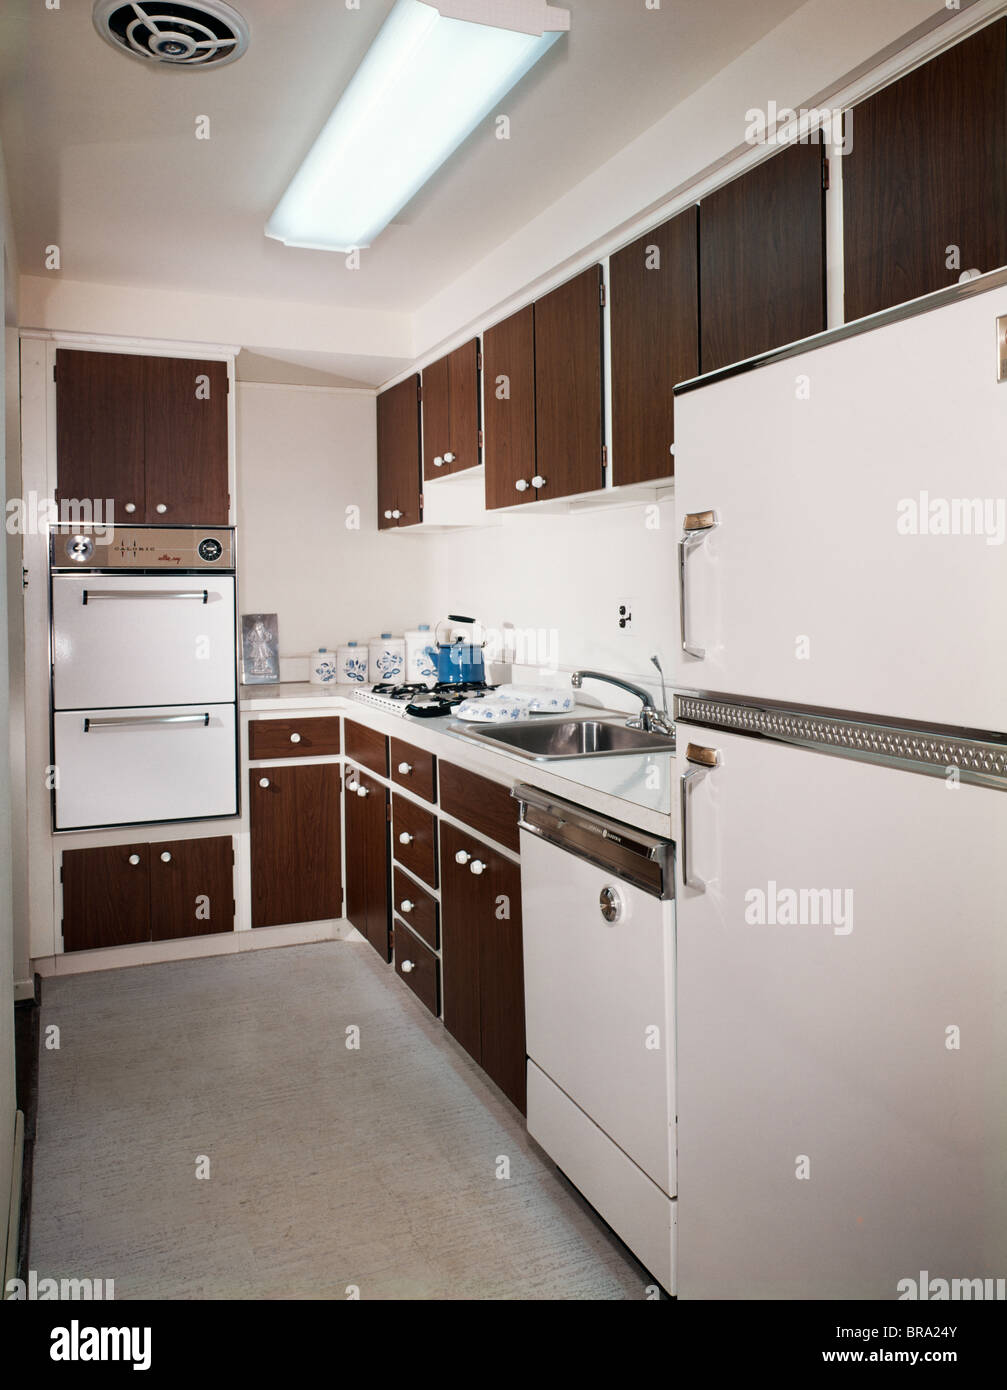 1970s NARROW GALLEY STYLE KITCHEN WITH DARK WOODEN CABINETS AND WHITE APPLIANCES Stock Photo